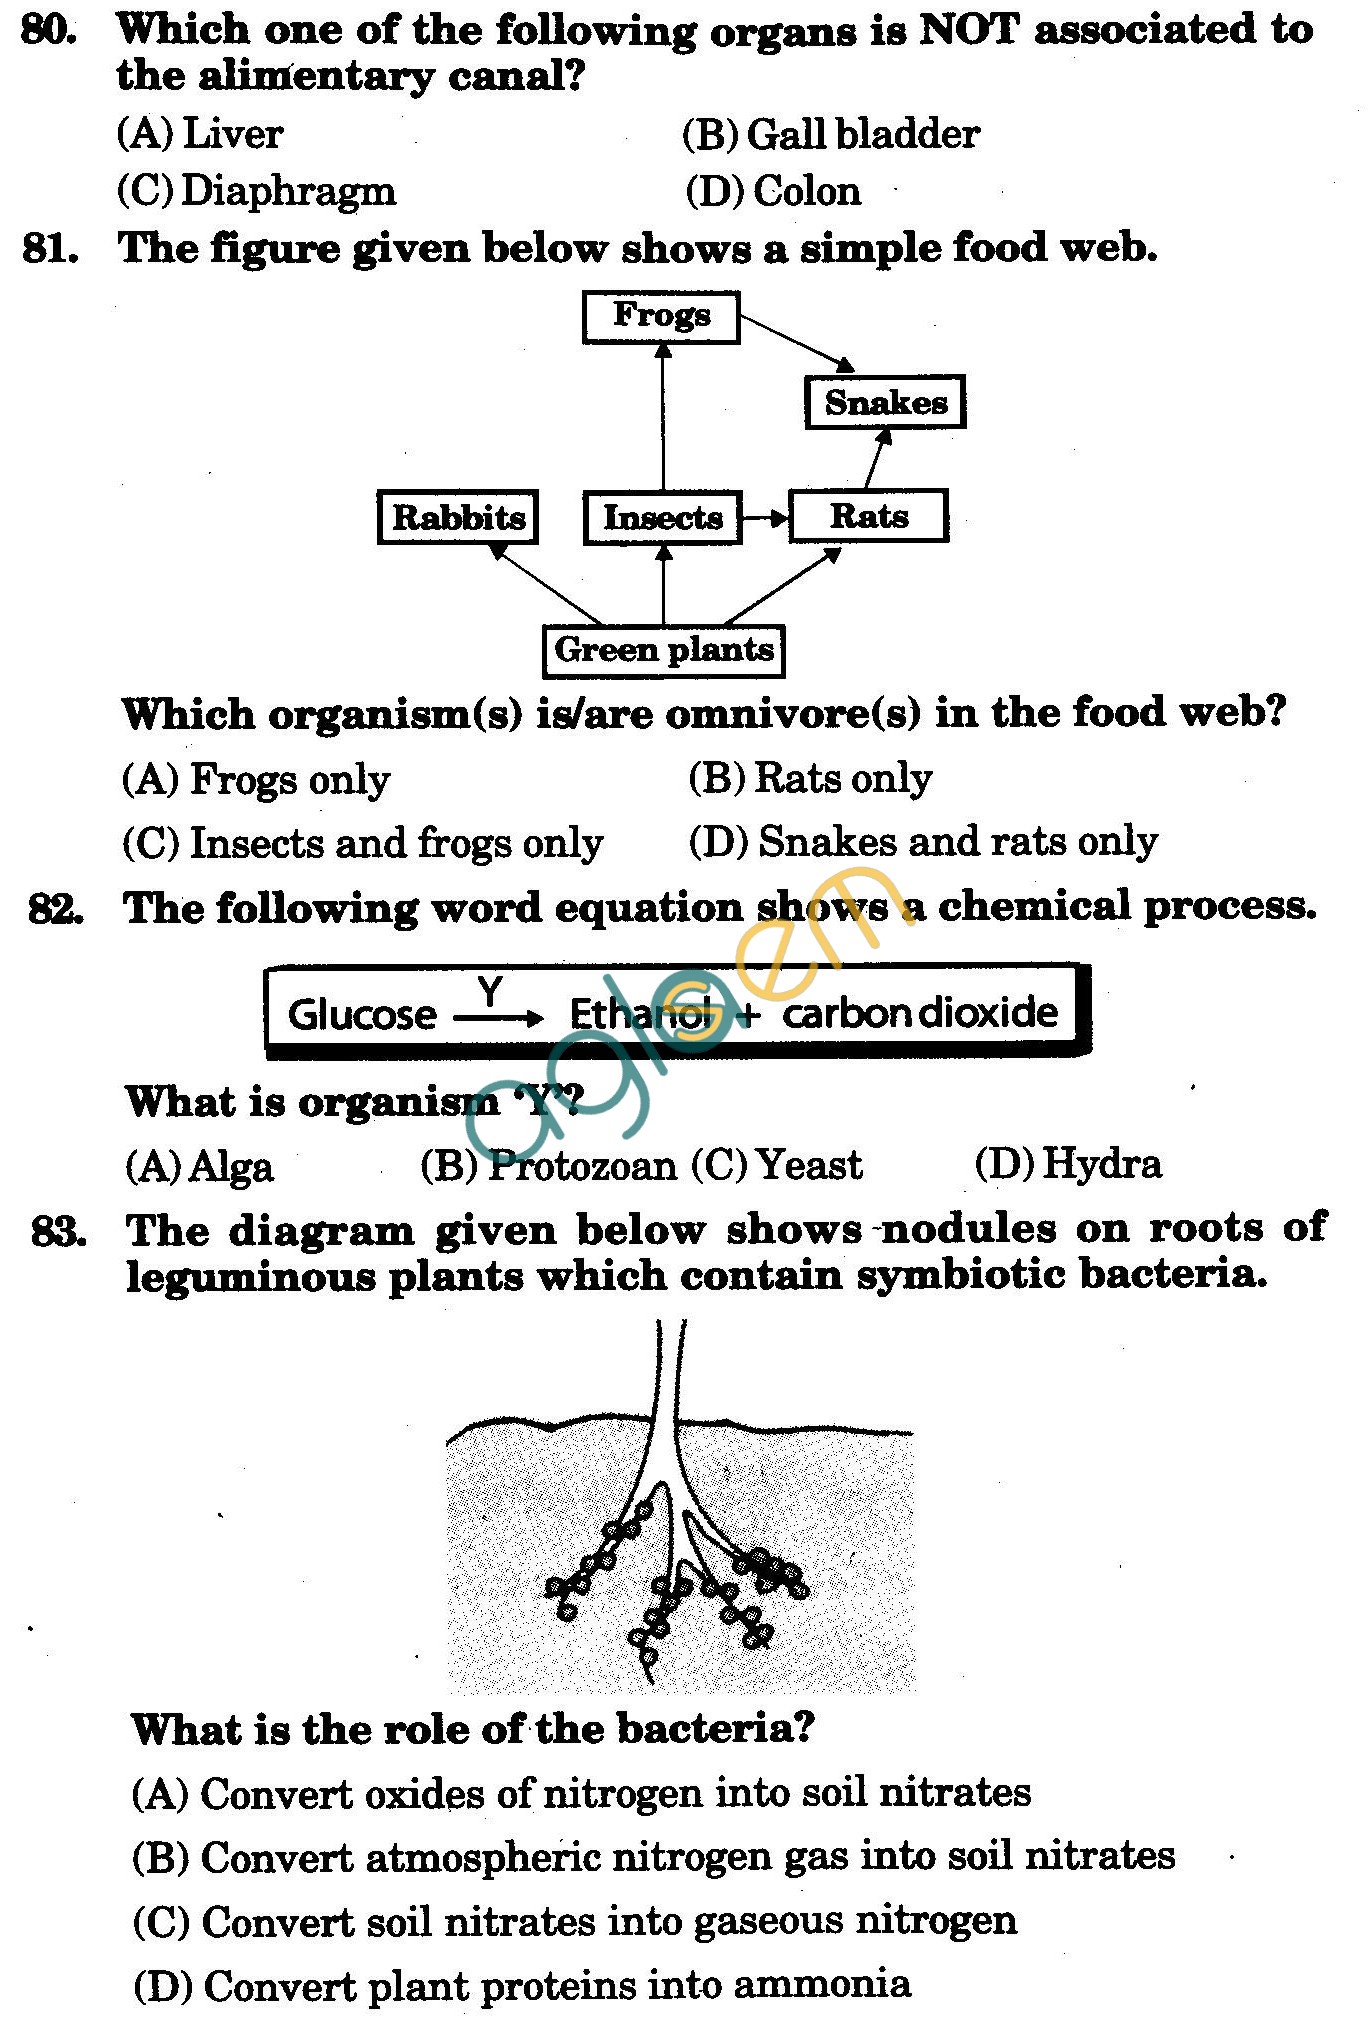 NSTSE 2010 Class VII Question Paper with Answers - Biology